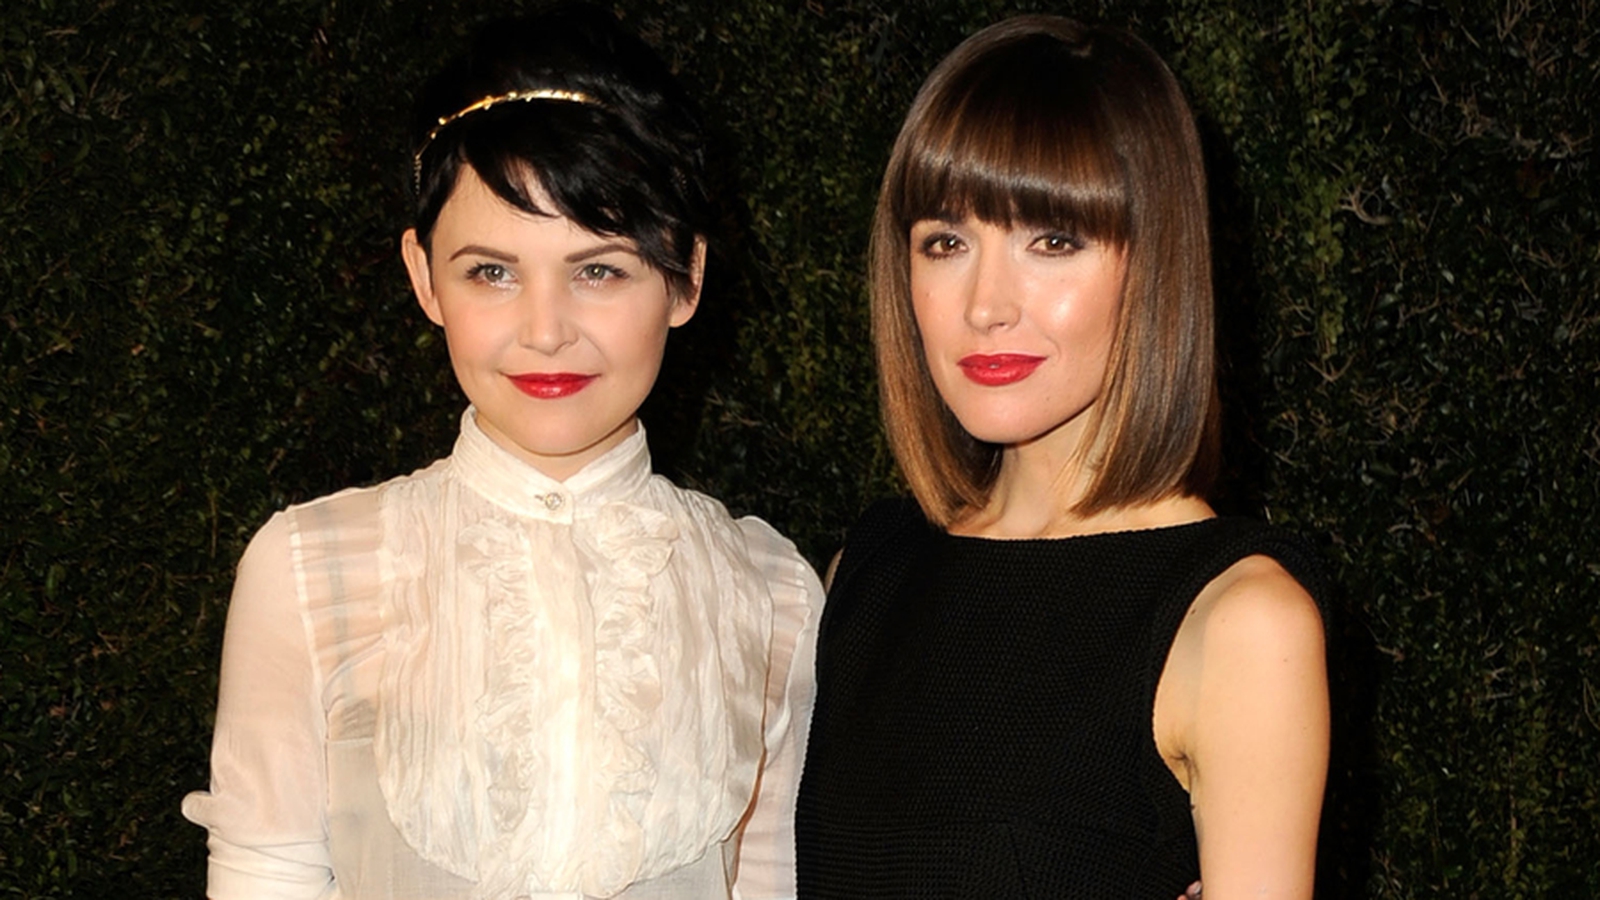 Stylish turnout for Chanel pre-Oscars party